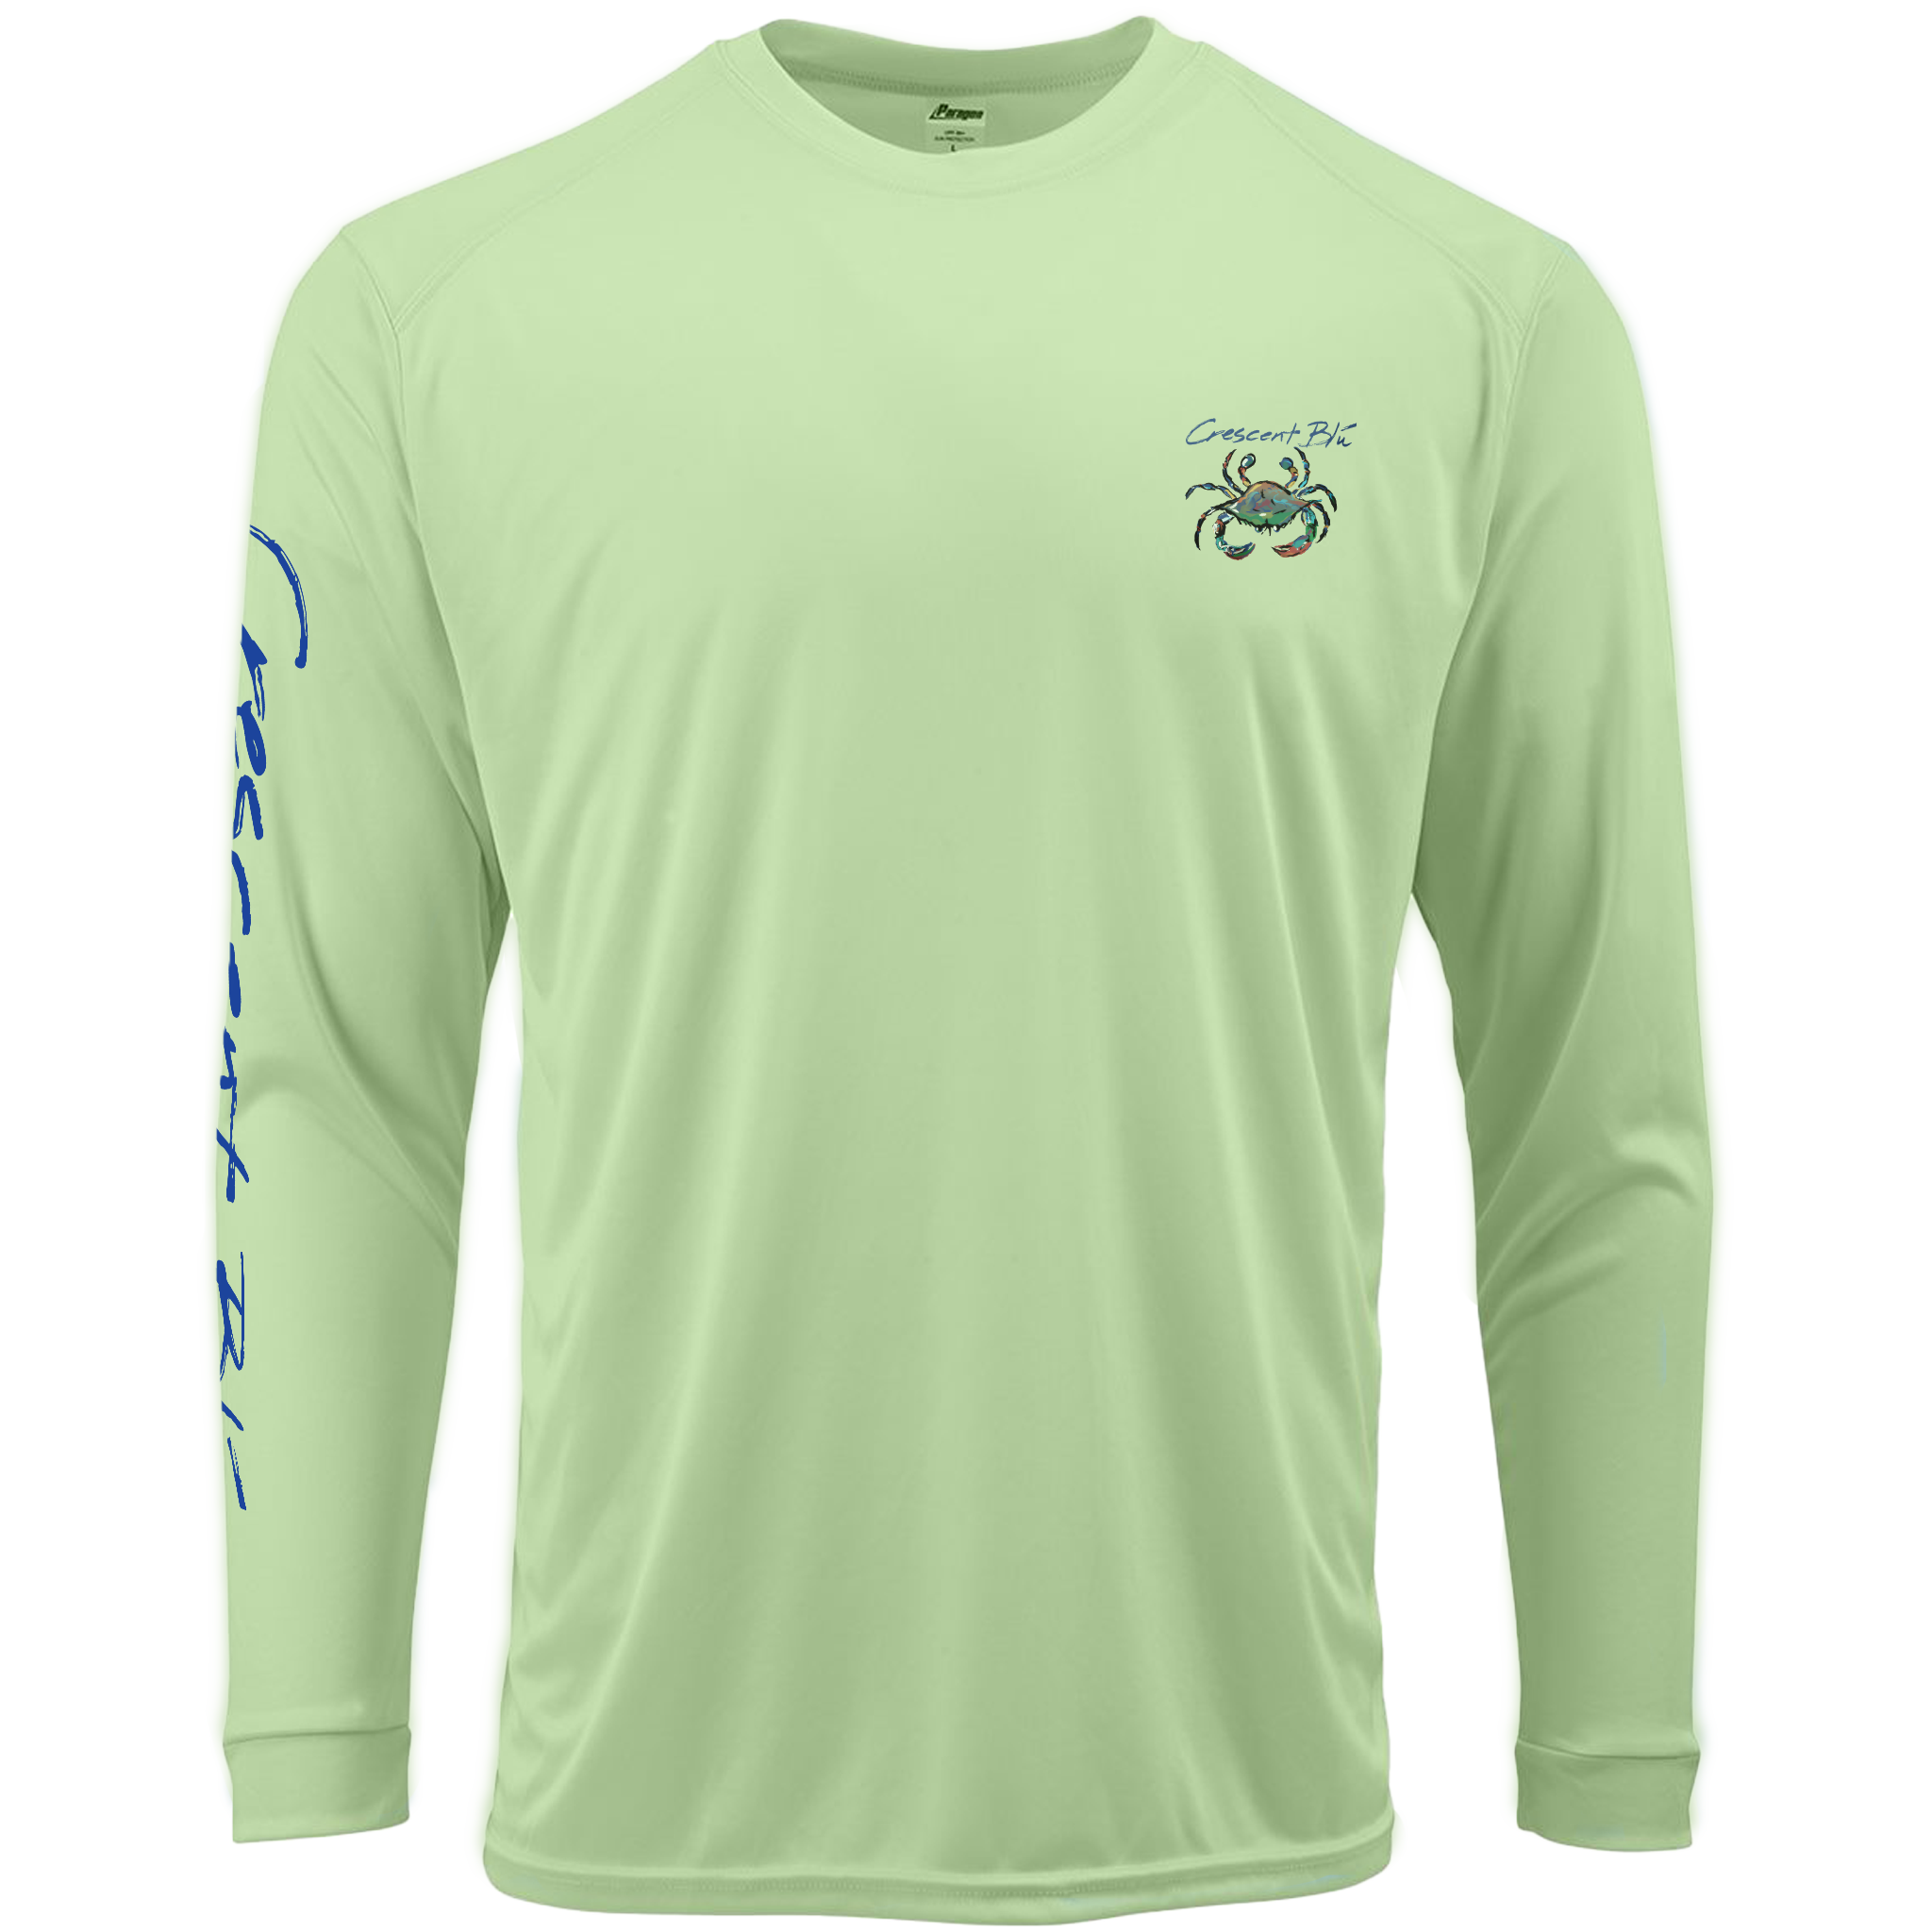 Limeade colored long sleeve adult sun shirt. Front view. Crescent Blu printed on right sleeve. Multi-colored crab logo on left upper chest.